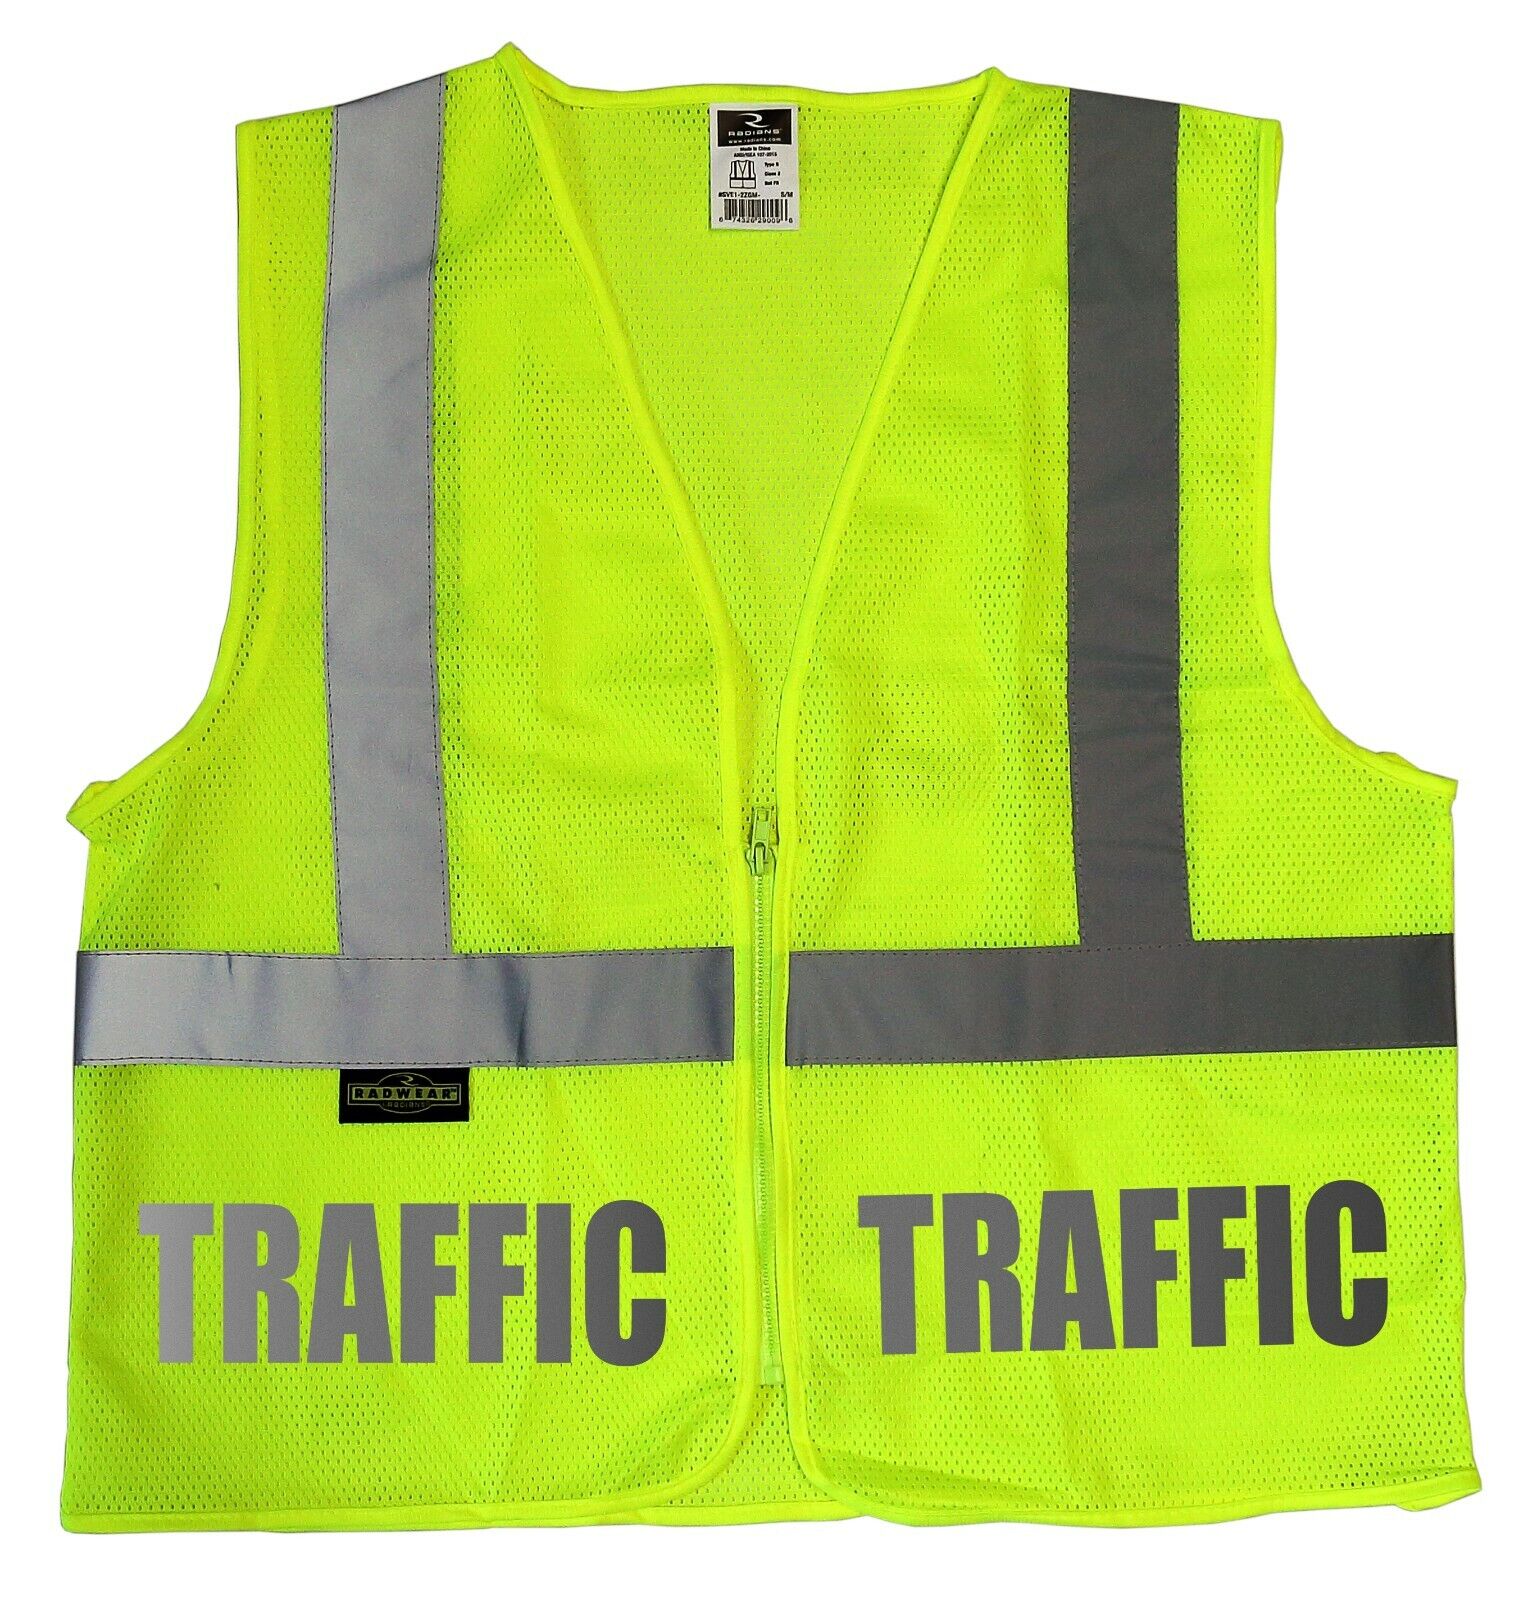 Traffic Staff safety Max 51% OFF vest with design Visibilit 2021 autumn and winter new REFLECTIVE High